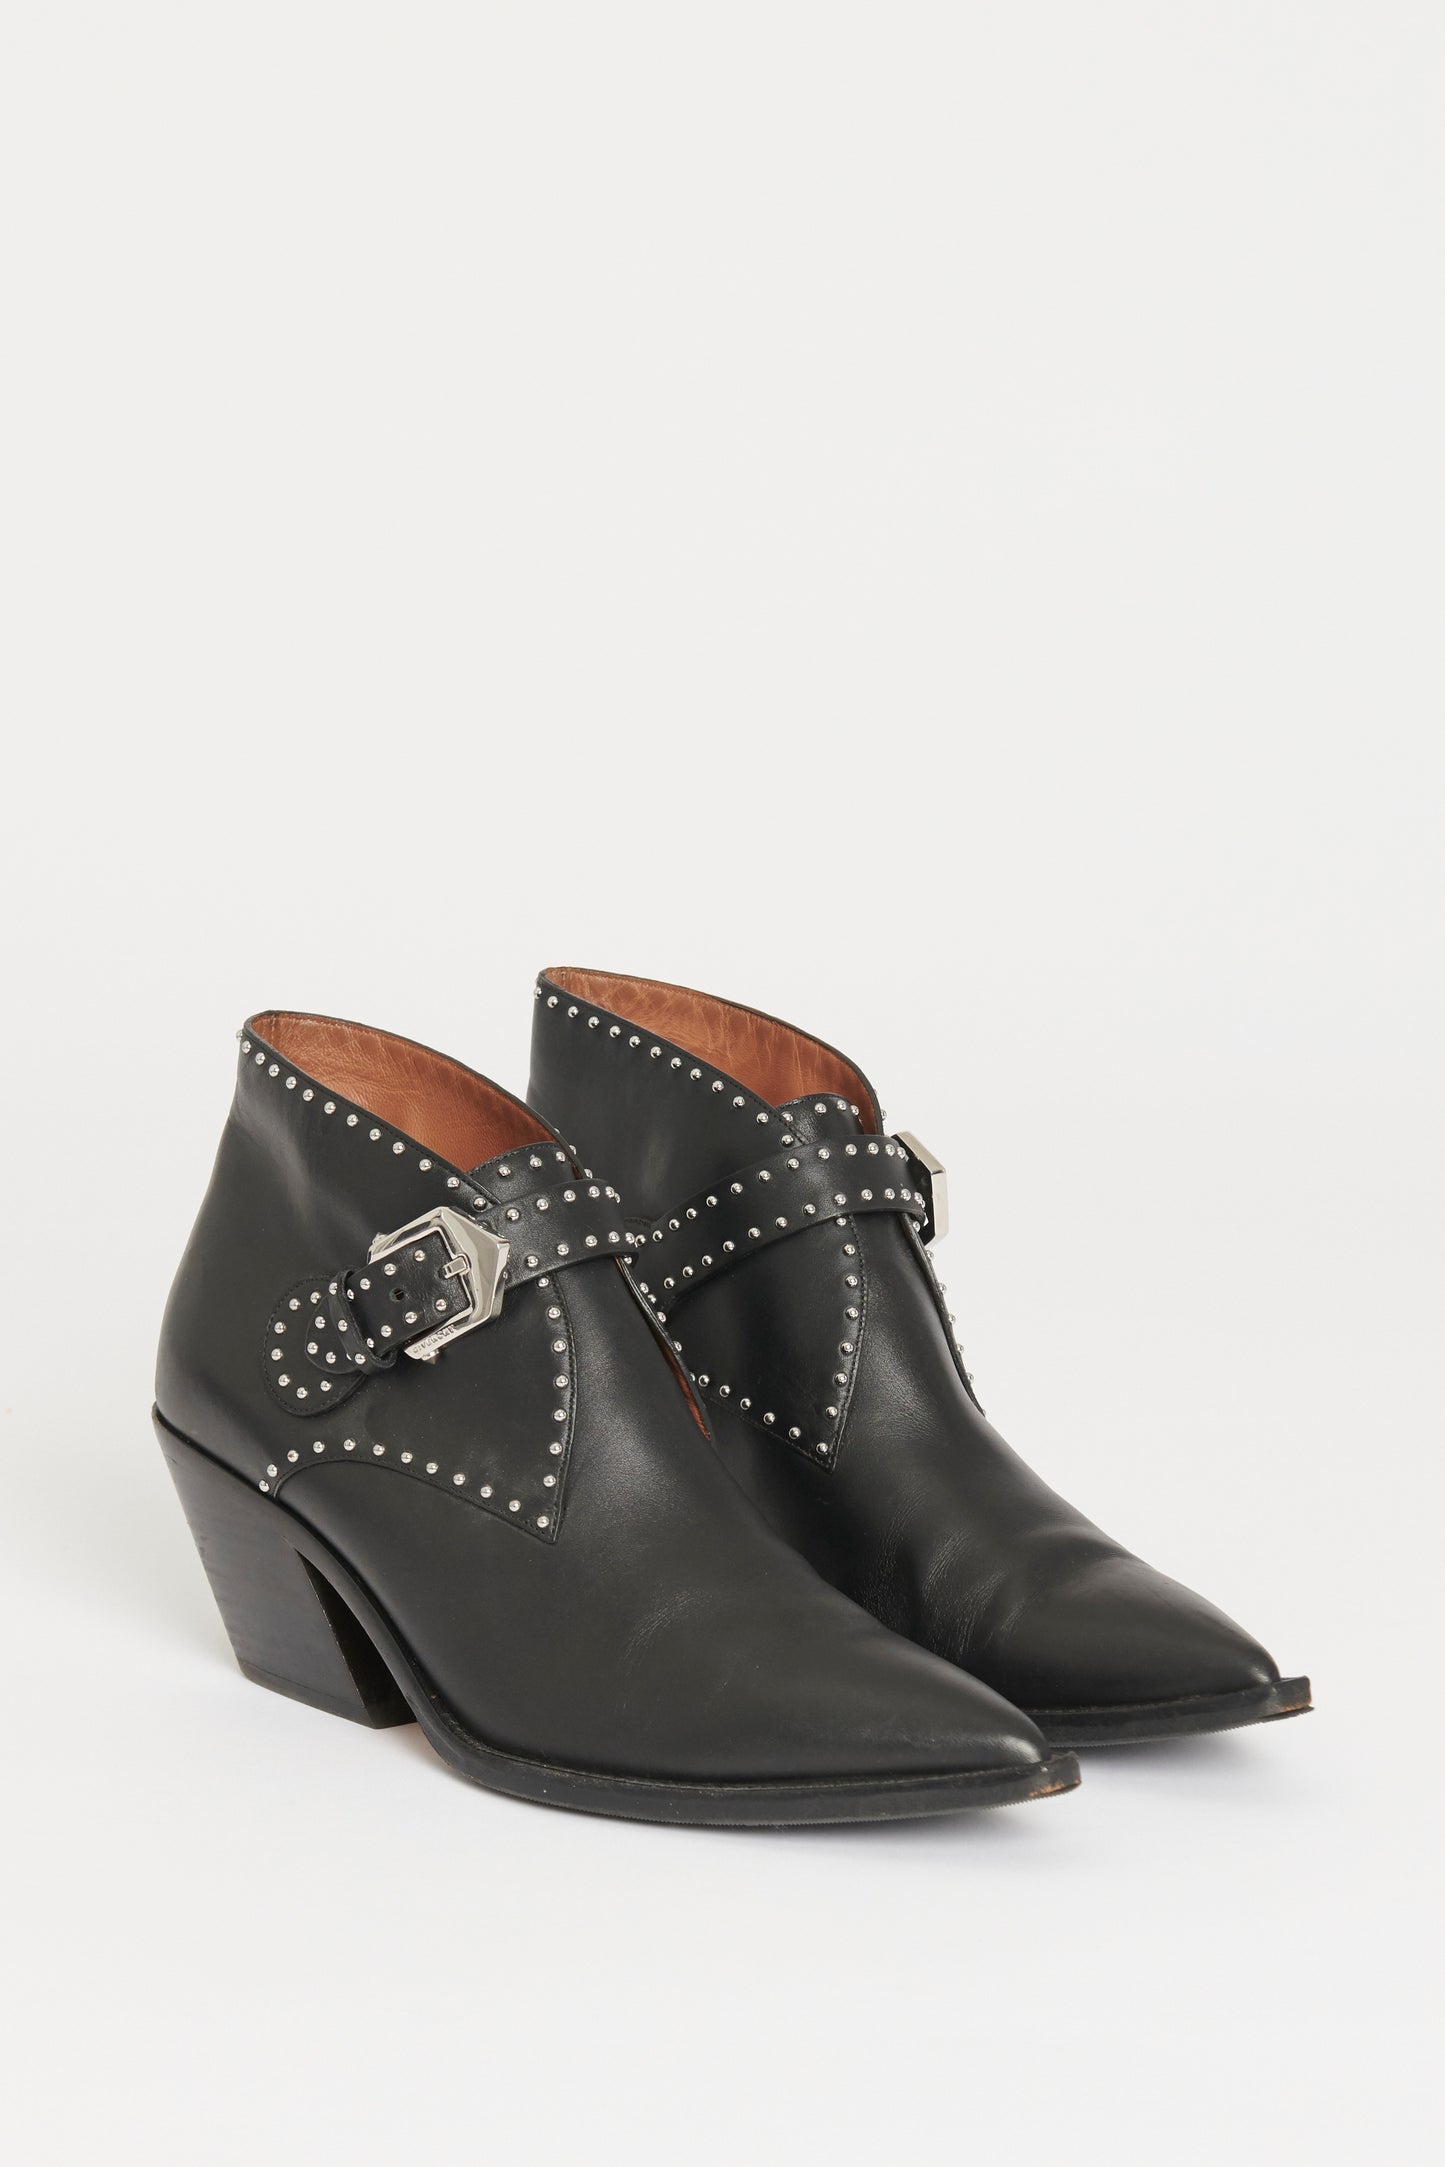 Black Leather Preowned Studded Ankle Boots